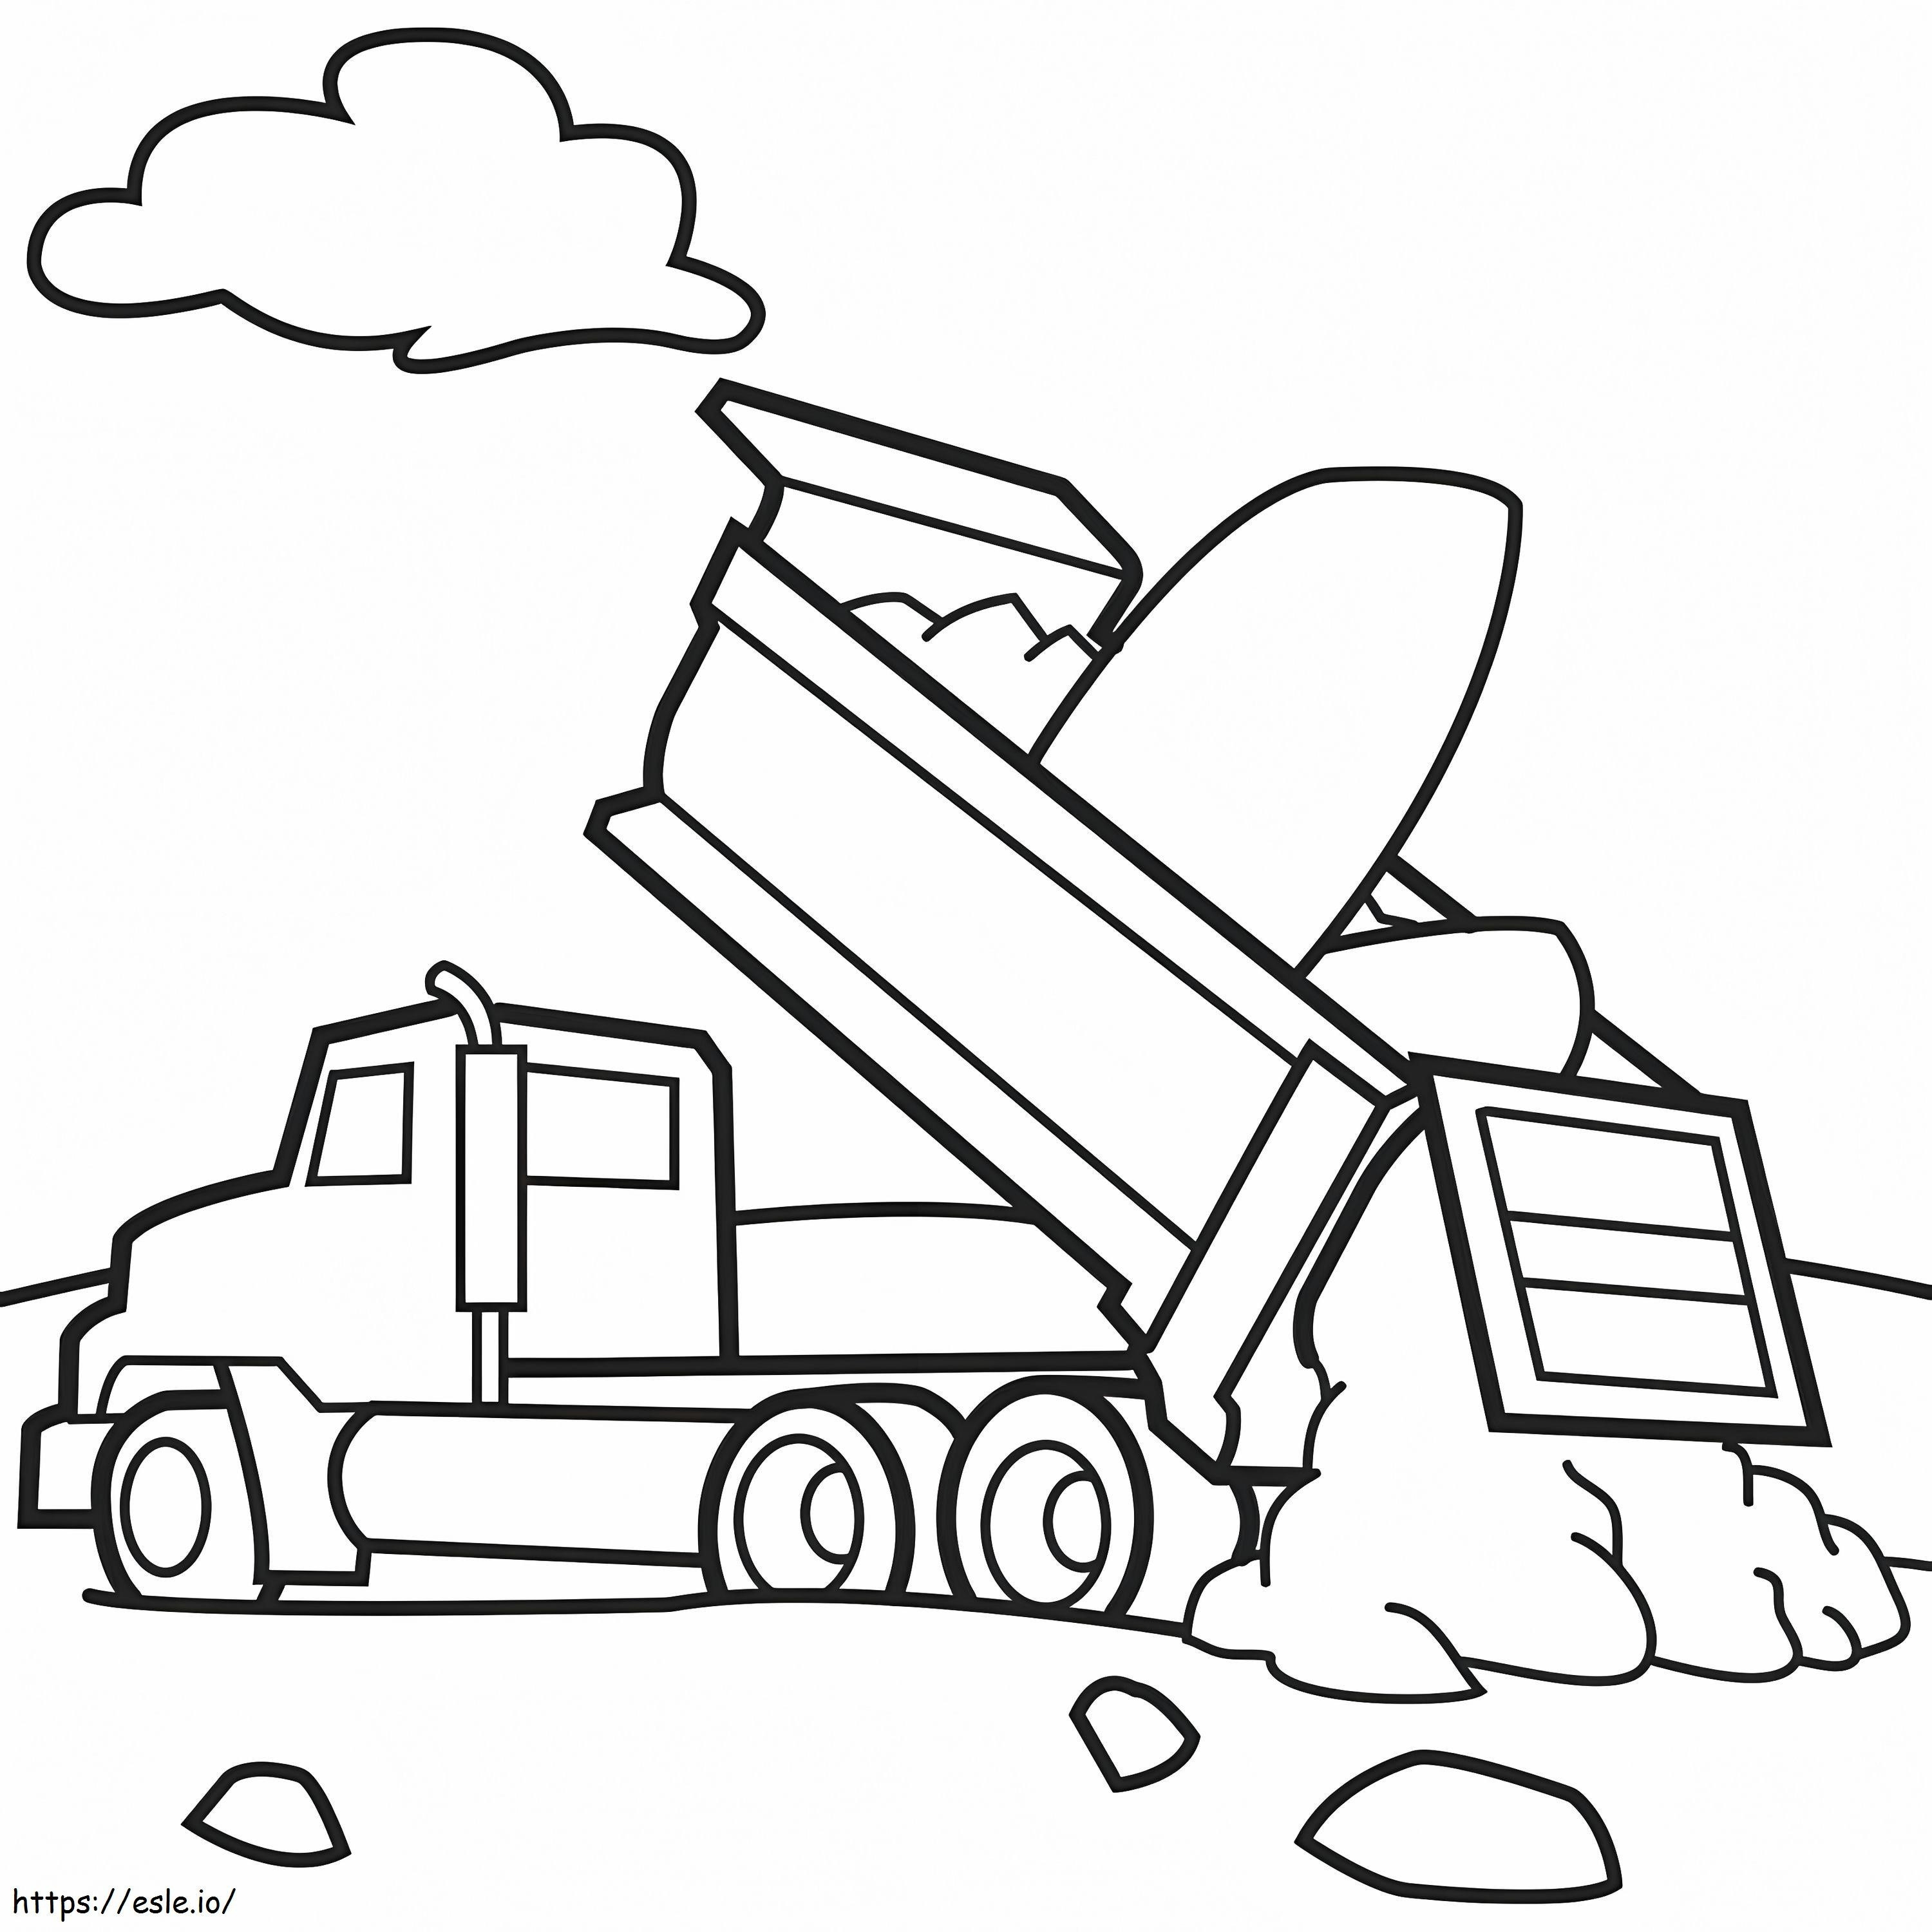 Dump Truck 1 coloring page